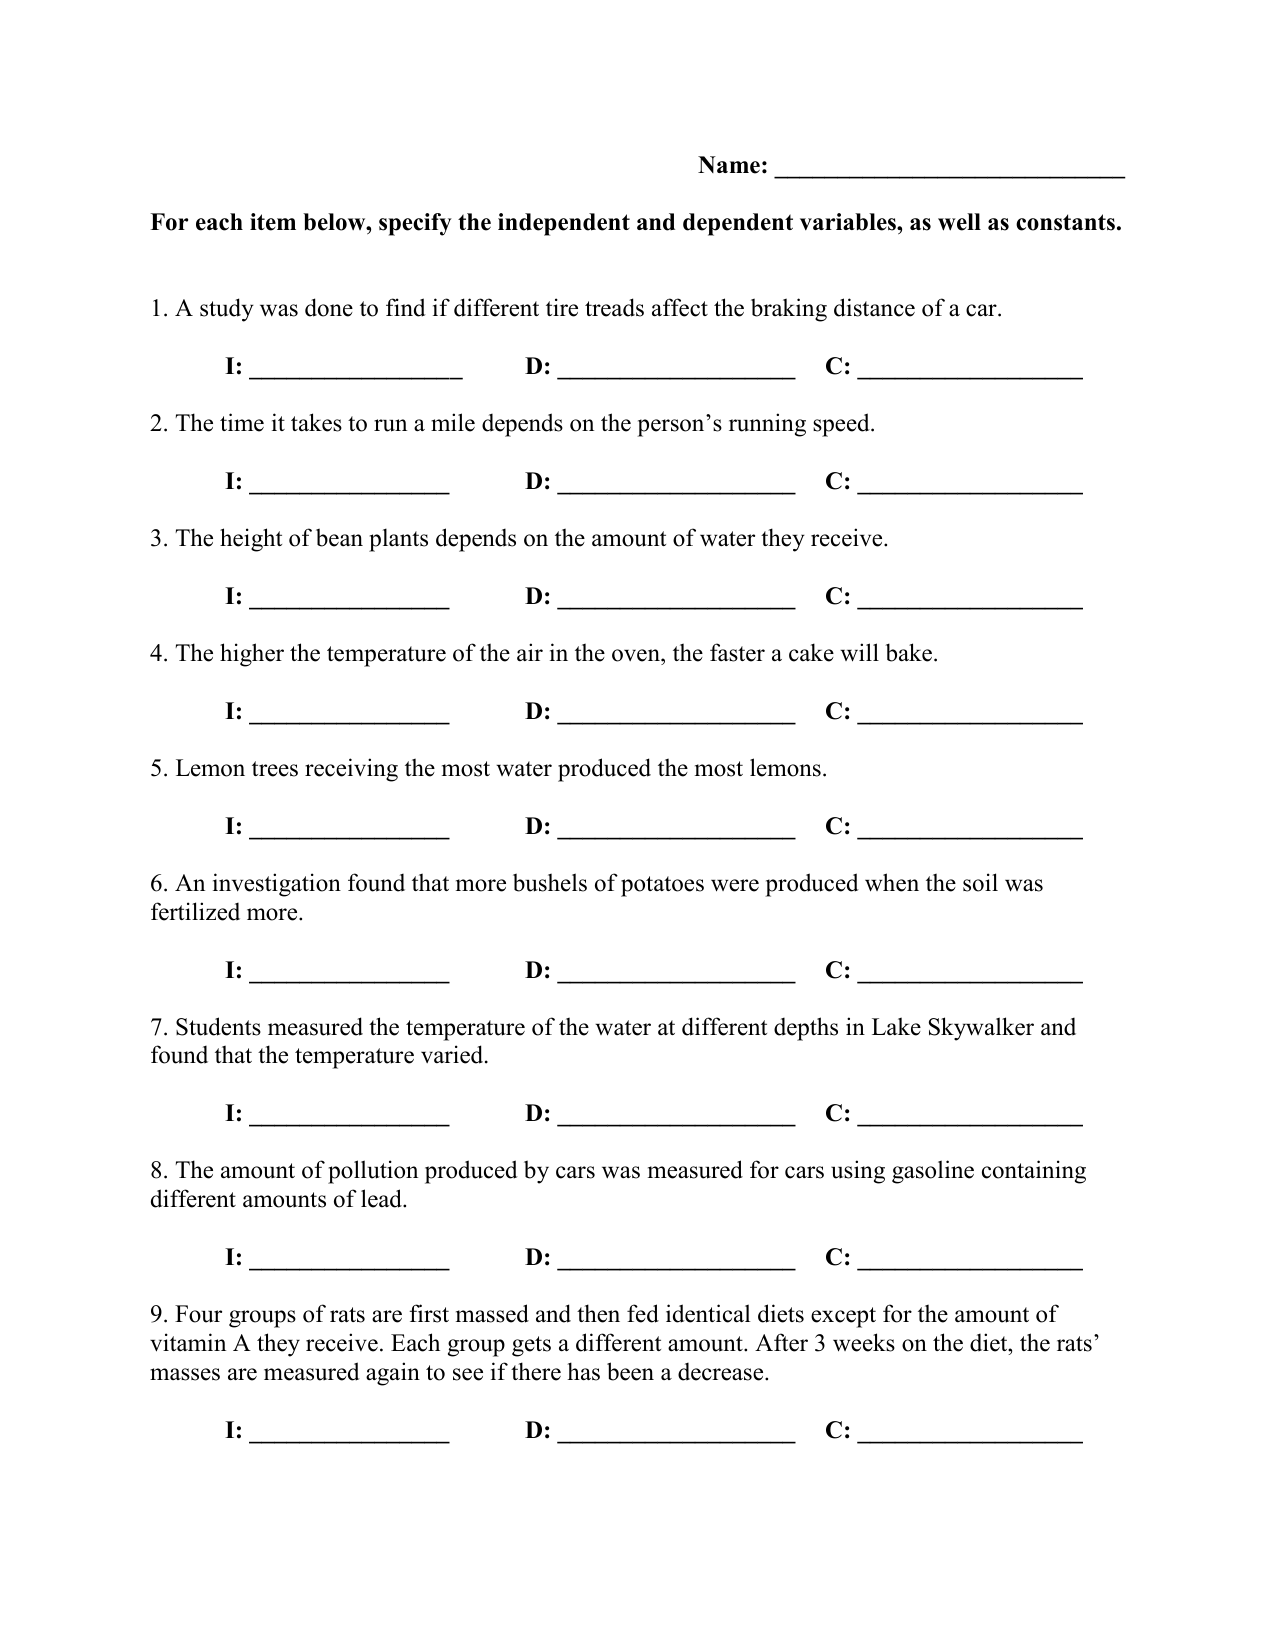 experimental-variables-worksheet-answers-6th-grade-hypothesis-worksheet-refrence-7-independent